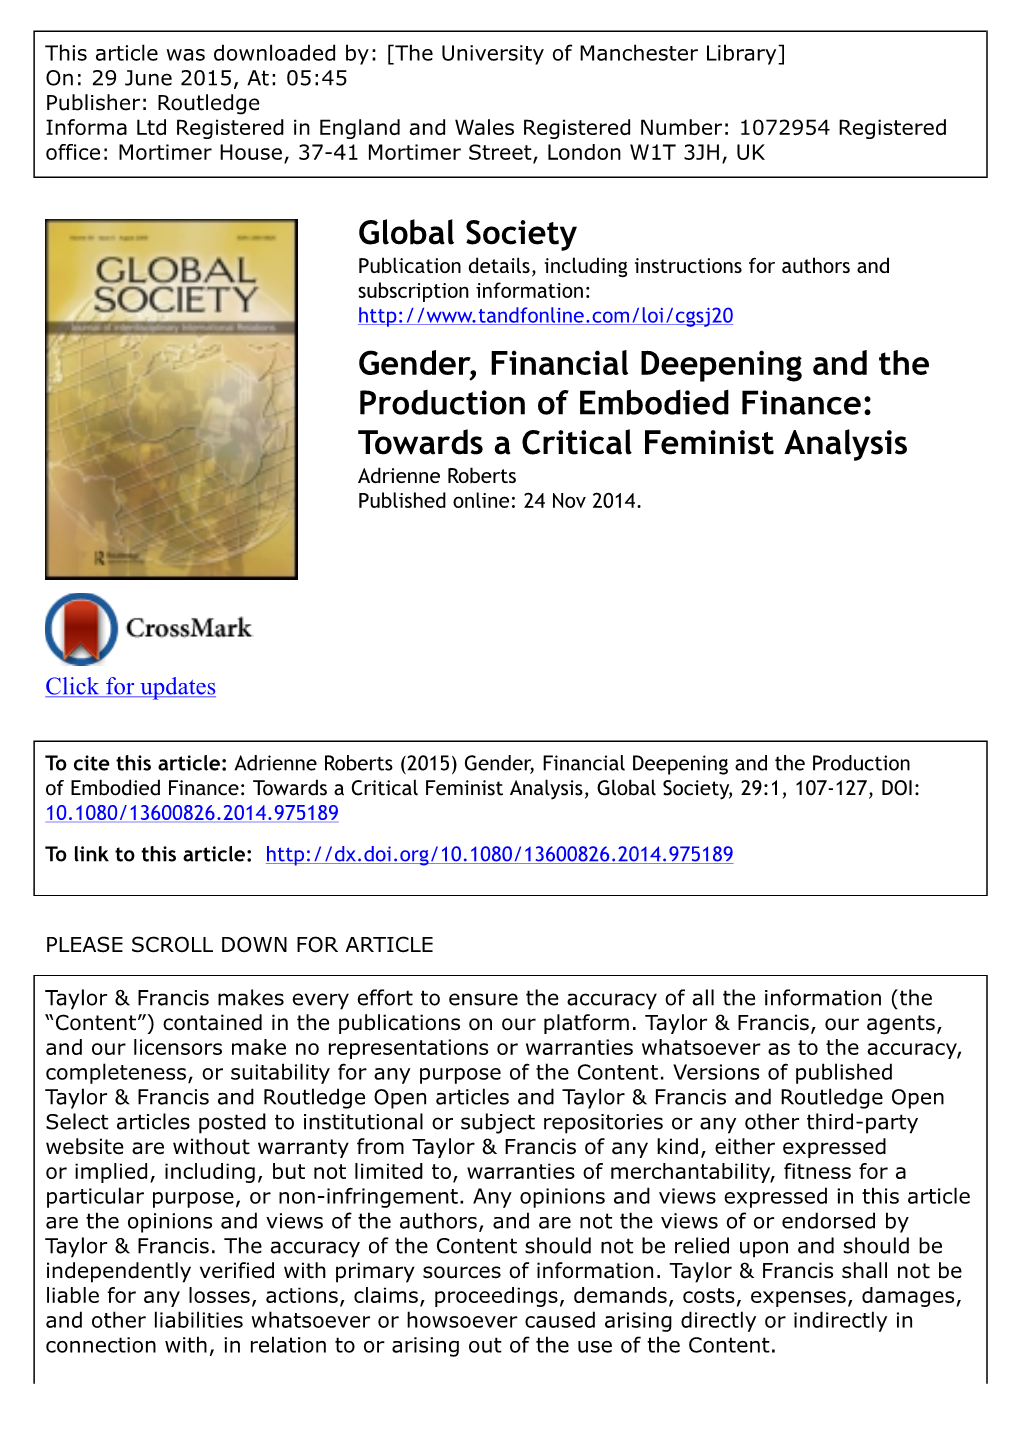 Gender, Financial Deepening and the Production of Embodied Finance: Towards a Critical Feminist Analysis Adrienne Roberts Published Online: 24 Nov 2014